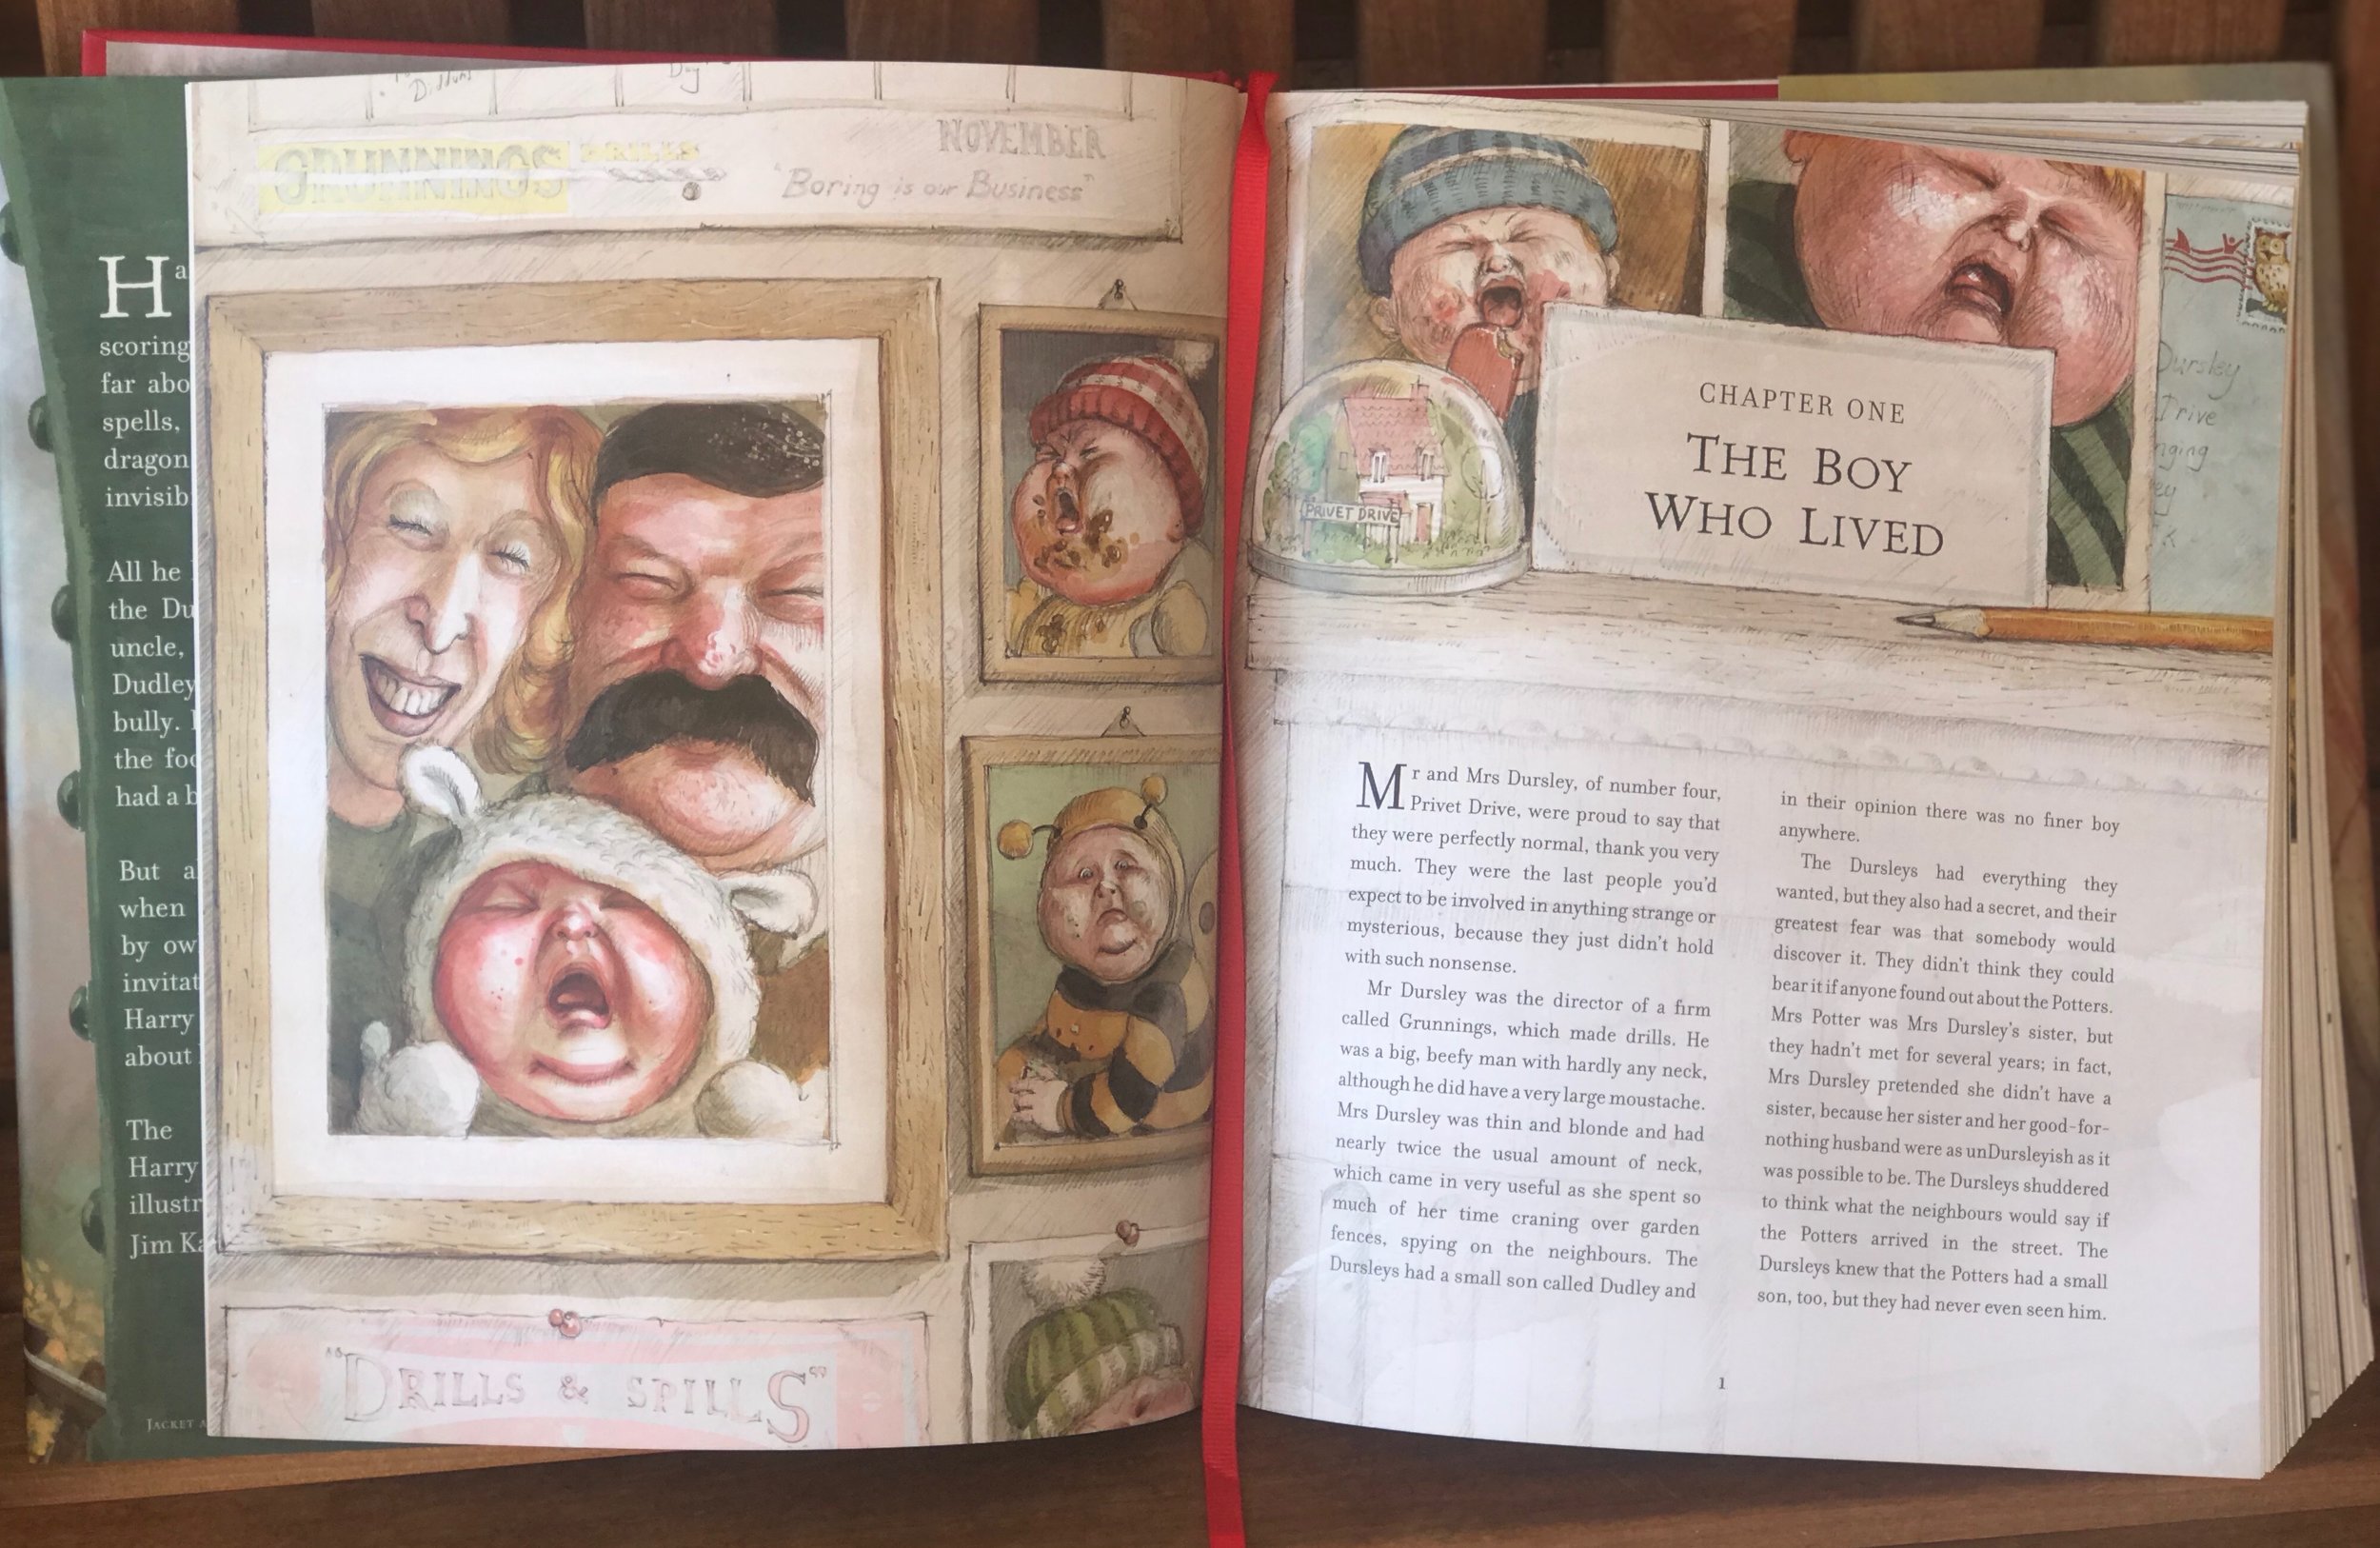 Harry Potter's Illustrated Editions are Remarkable